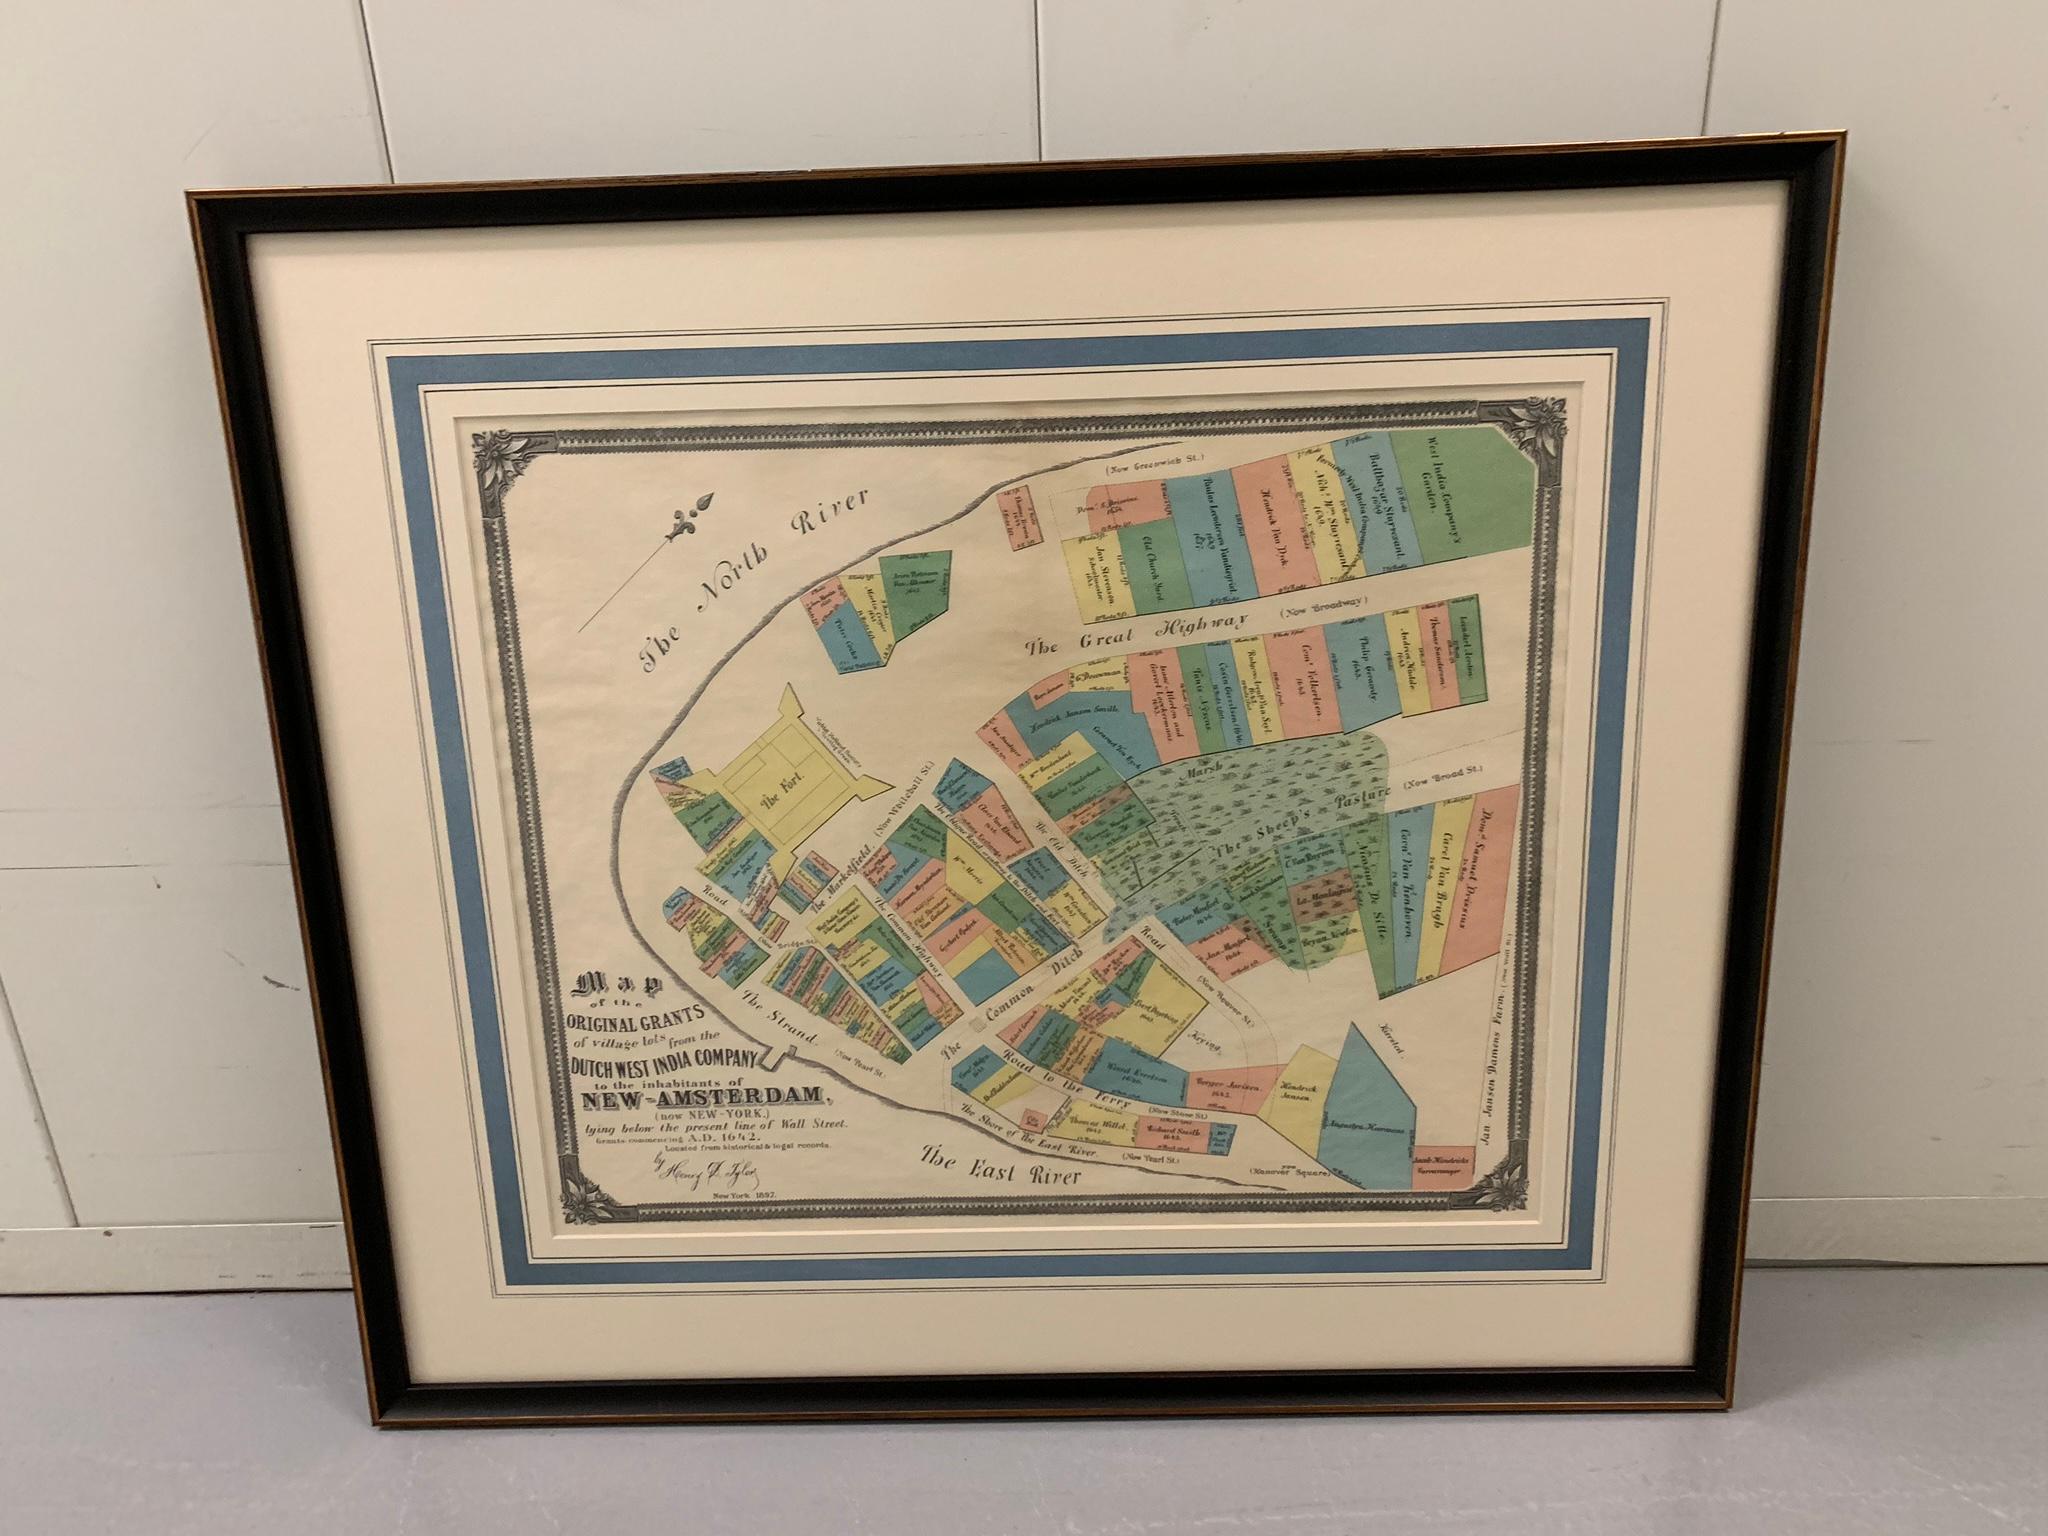 Framed hand colored 1897 map of New Amsterdam (New York). An 1897 version of the original 1642 Dutch West India Company map. Recently reframed with UV anti glare glass. Hanging hardware not included.